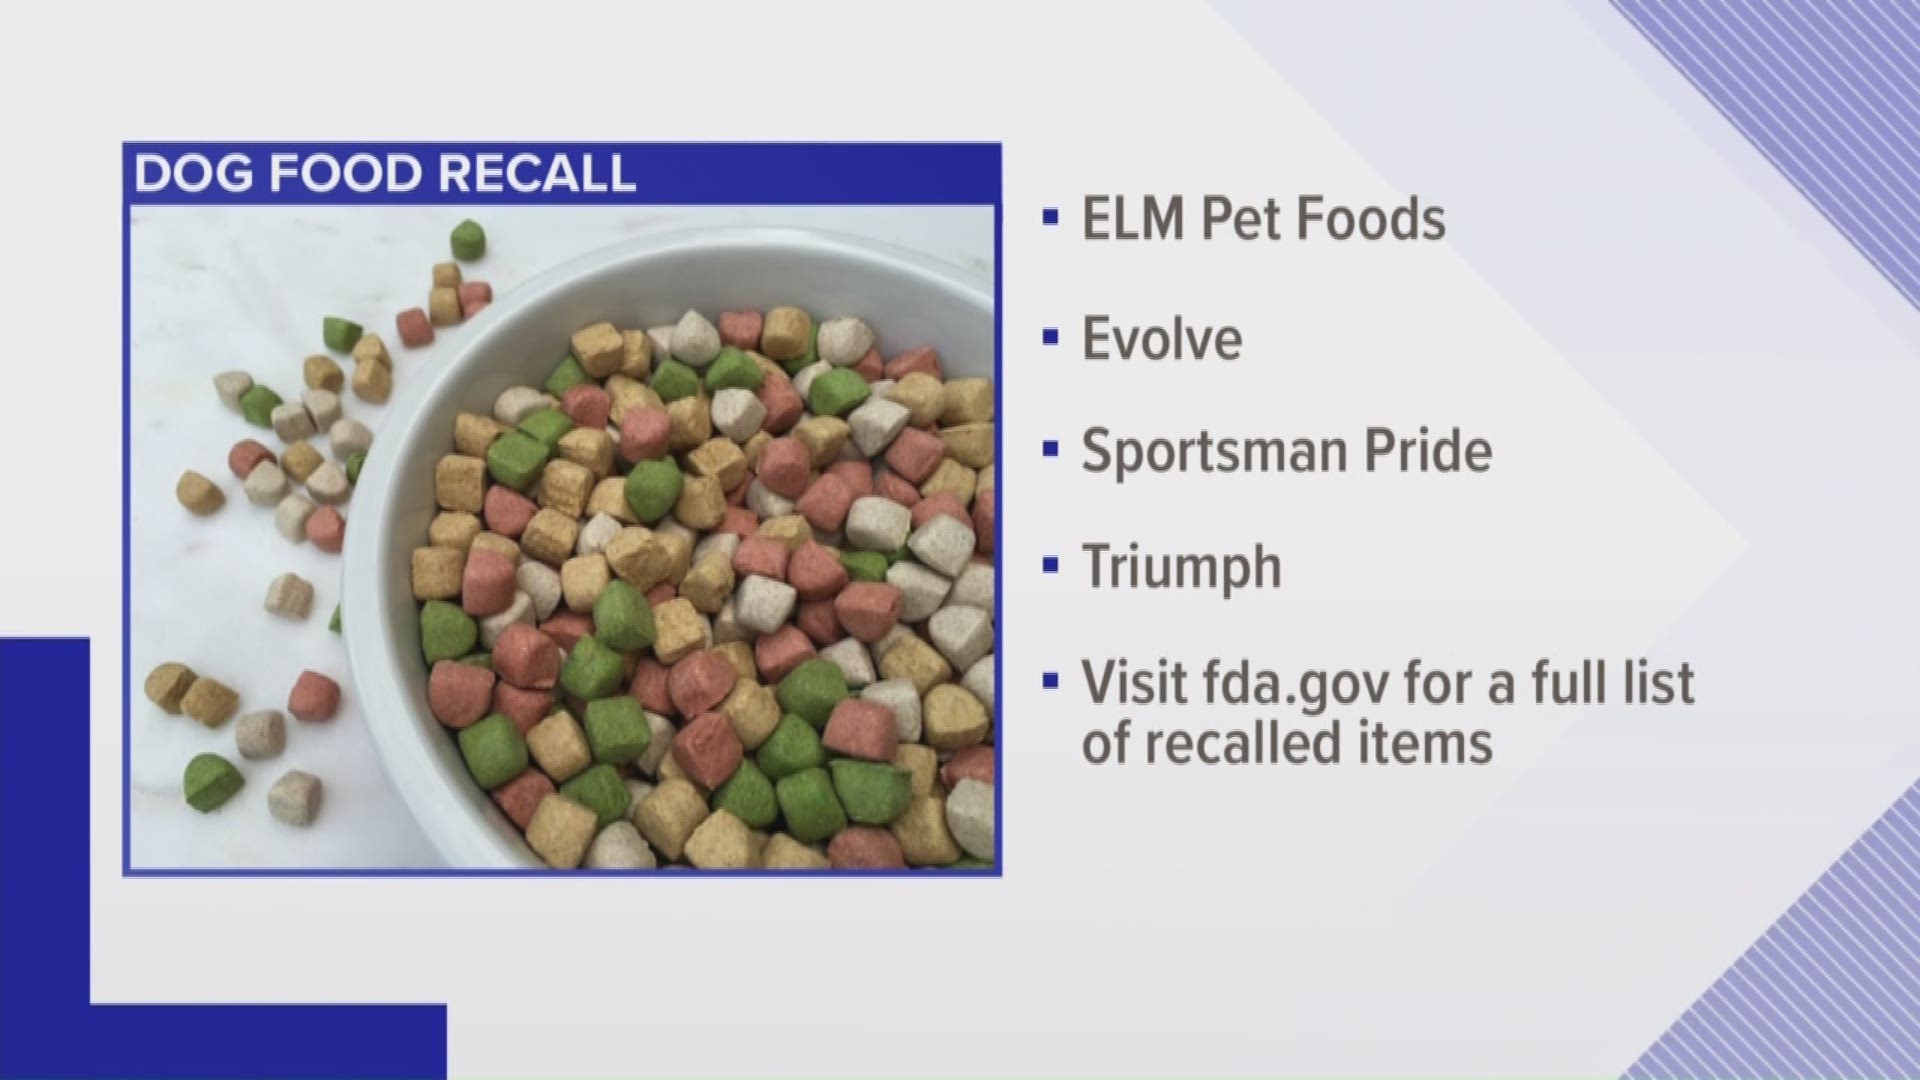 Consumer alert: Dog food recalled for high levels of vitamin D